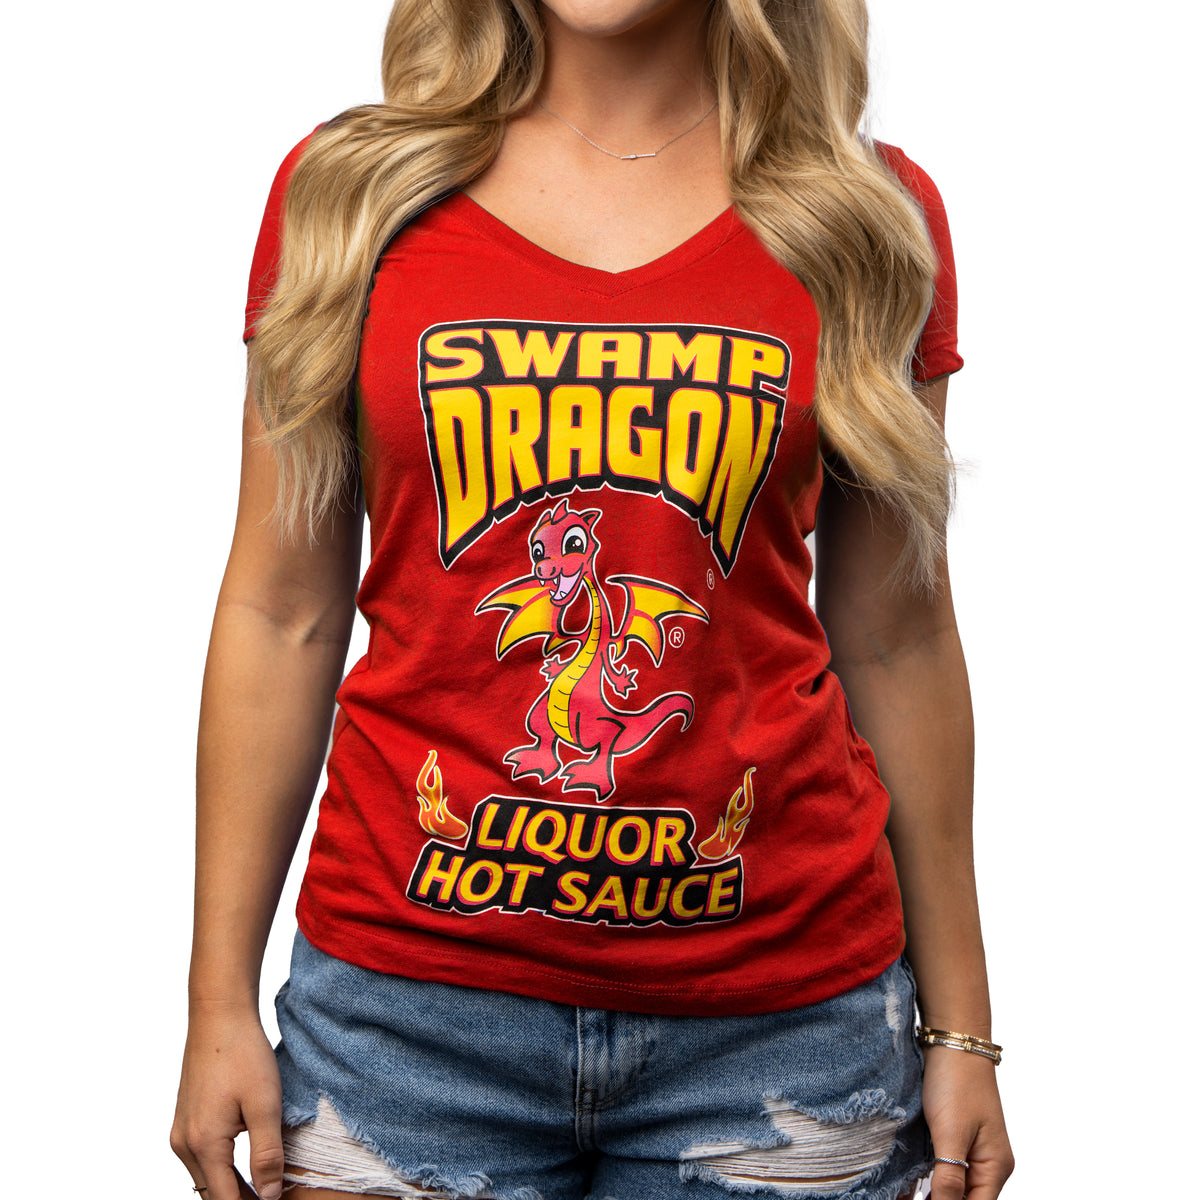 Female wearing a red deep vee neck t-shirt with Swamp Dragon logo and "Liquor Hot Sauce" on front